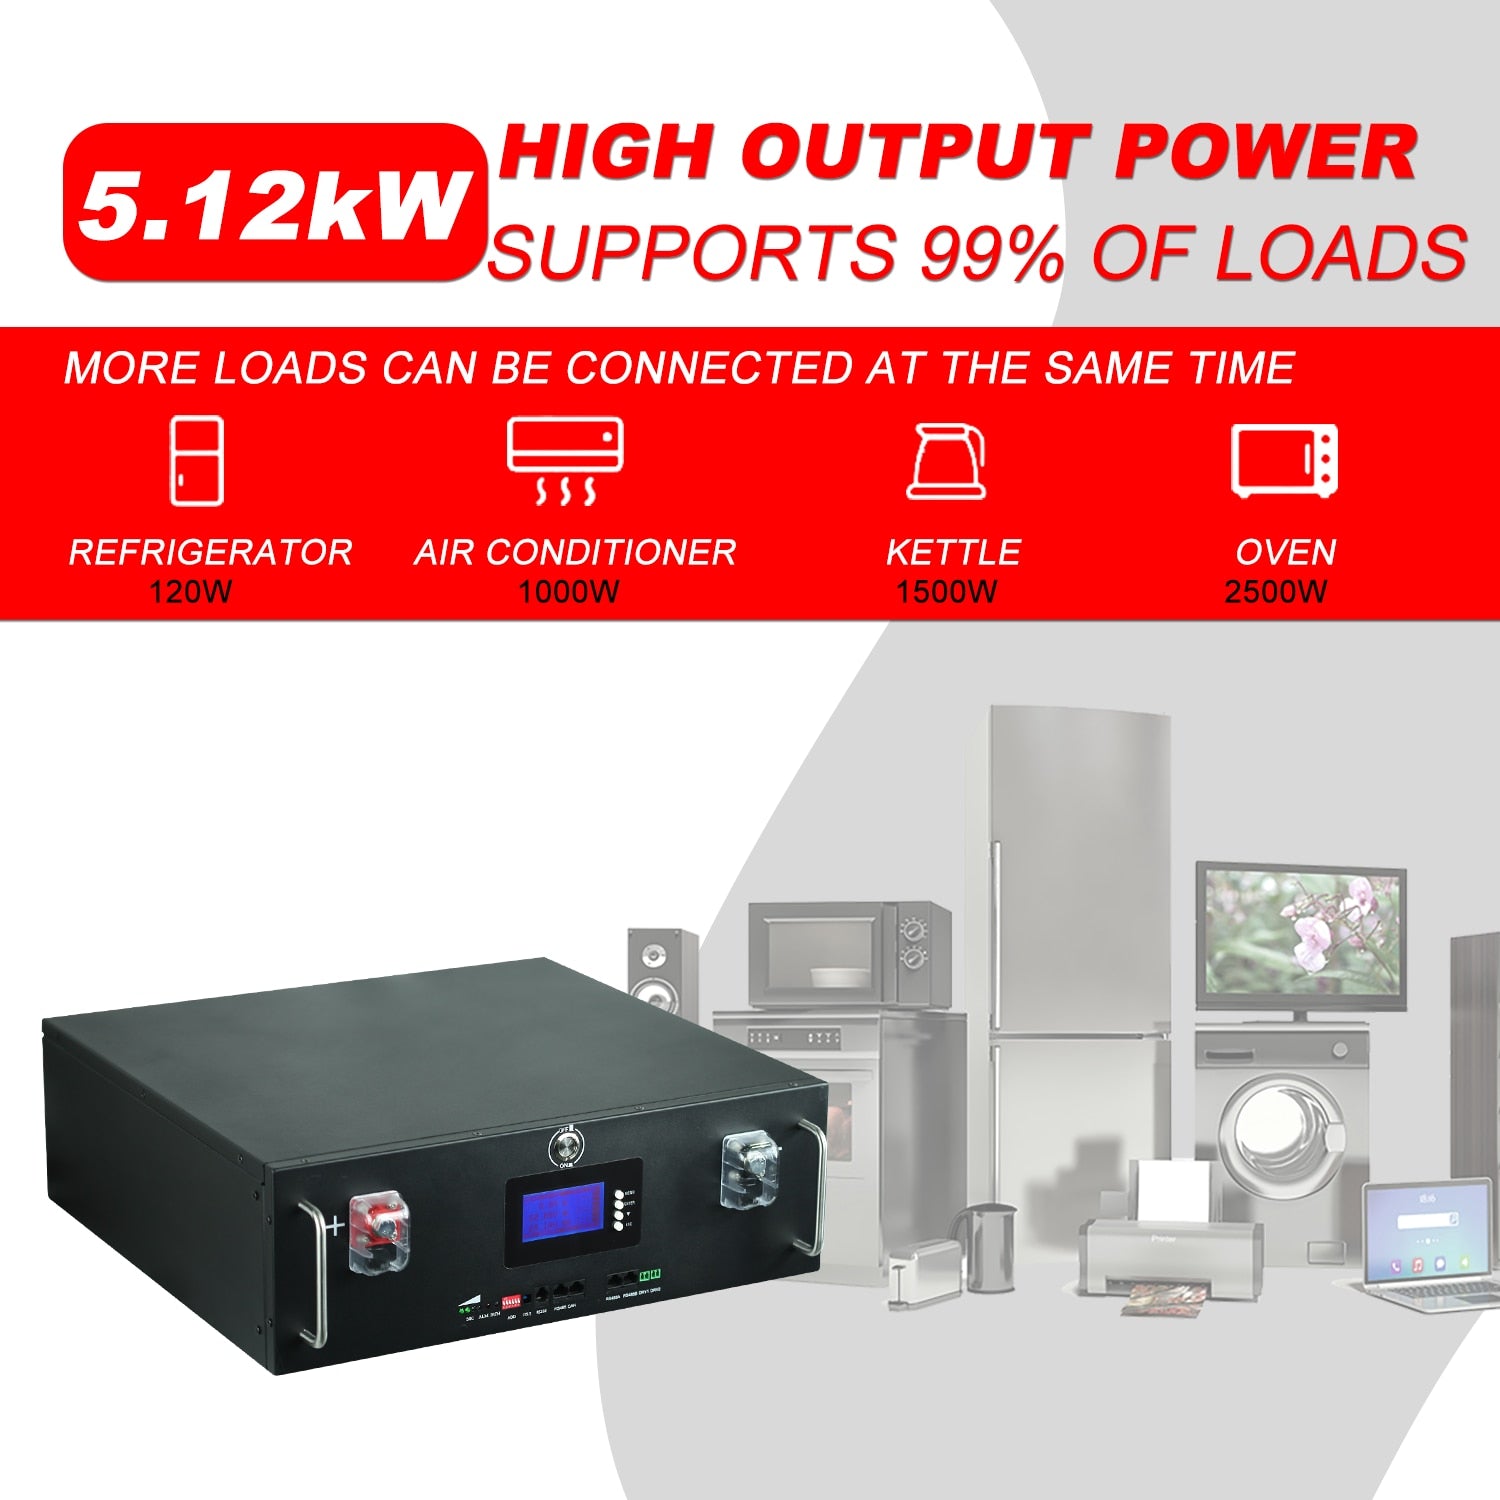 HIGH OUTPUT POWER 5.12kW SUPPORTS 